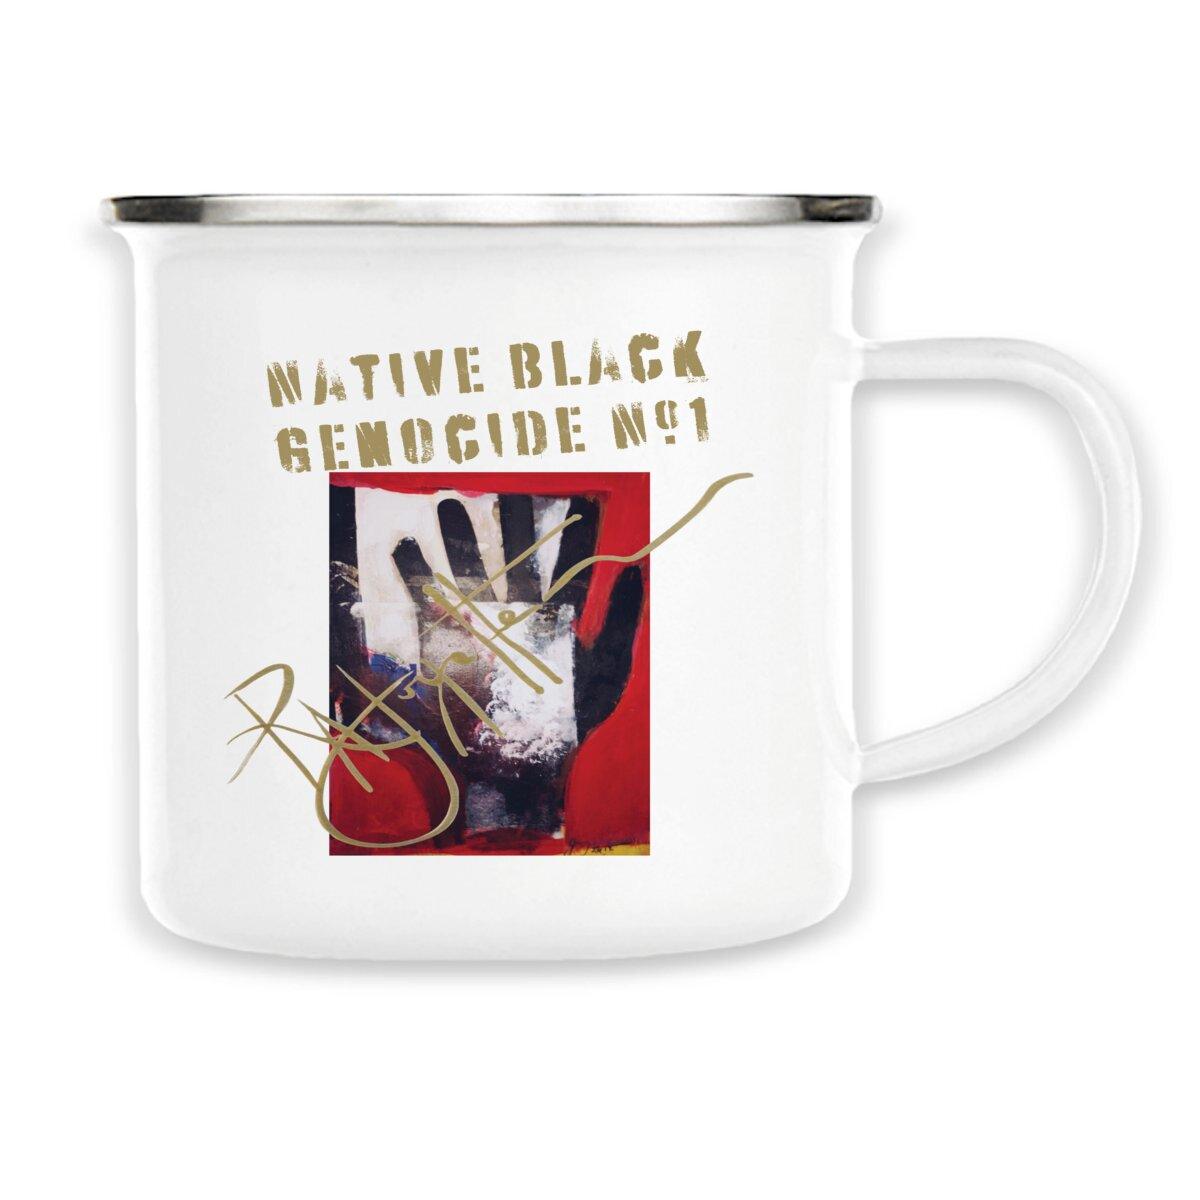 Native Black Genocide #1 Premium Enamel Mug, designed for hand wash only, not microwave safe, featuring impactful art, by Tree of Life Art.g